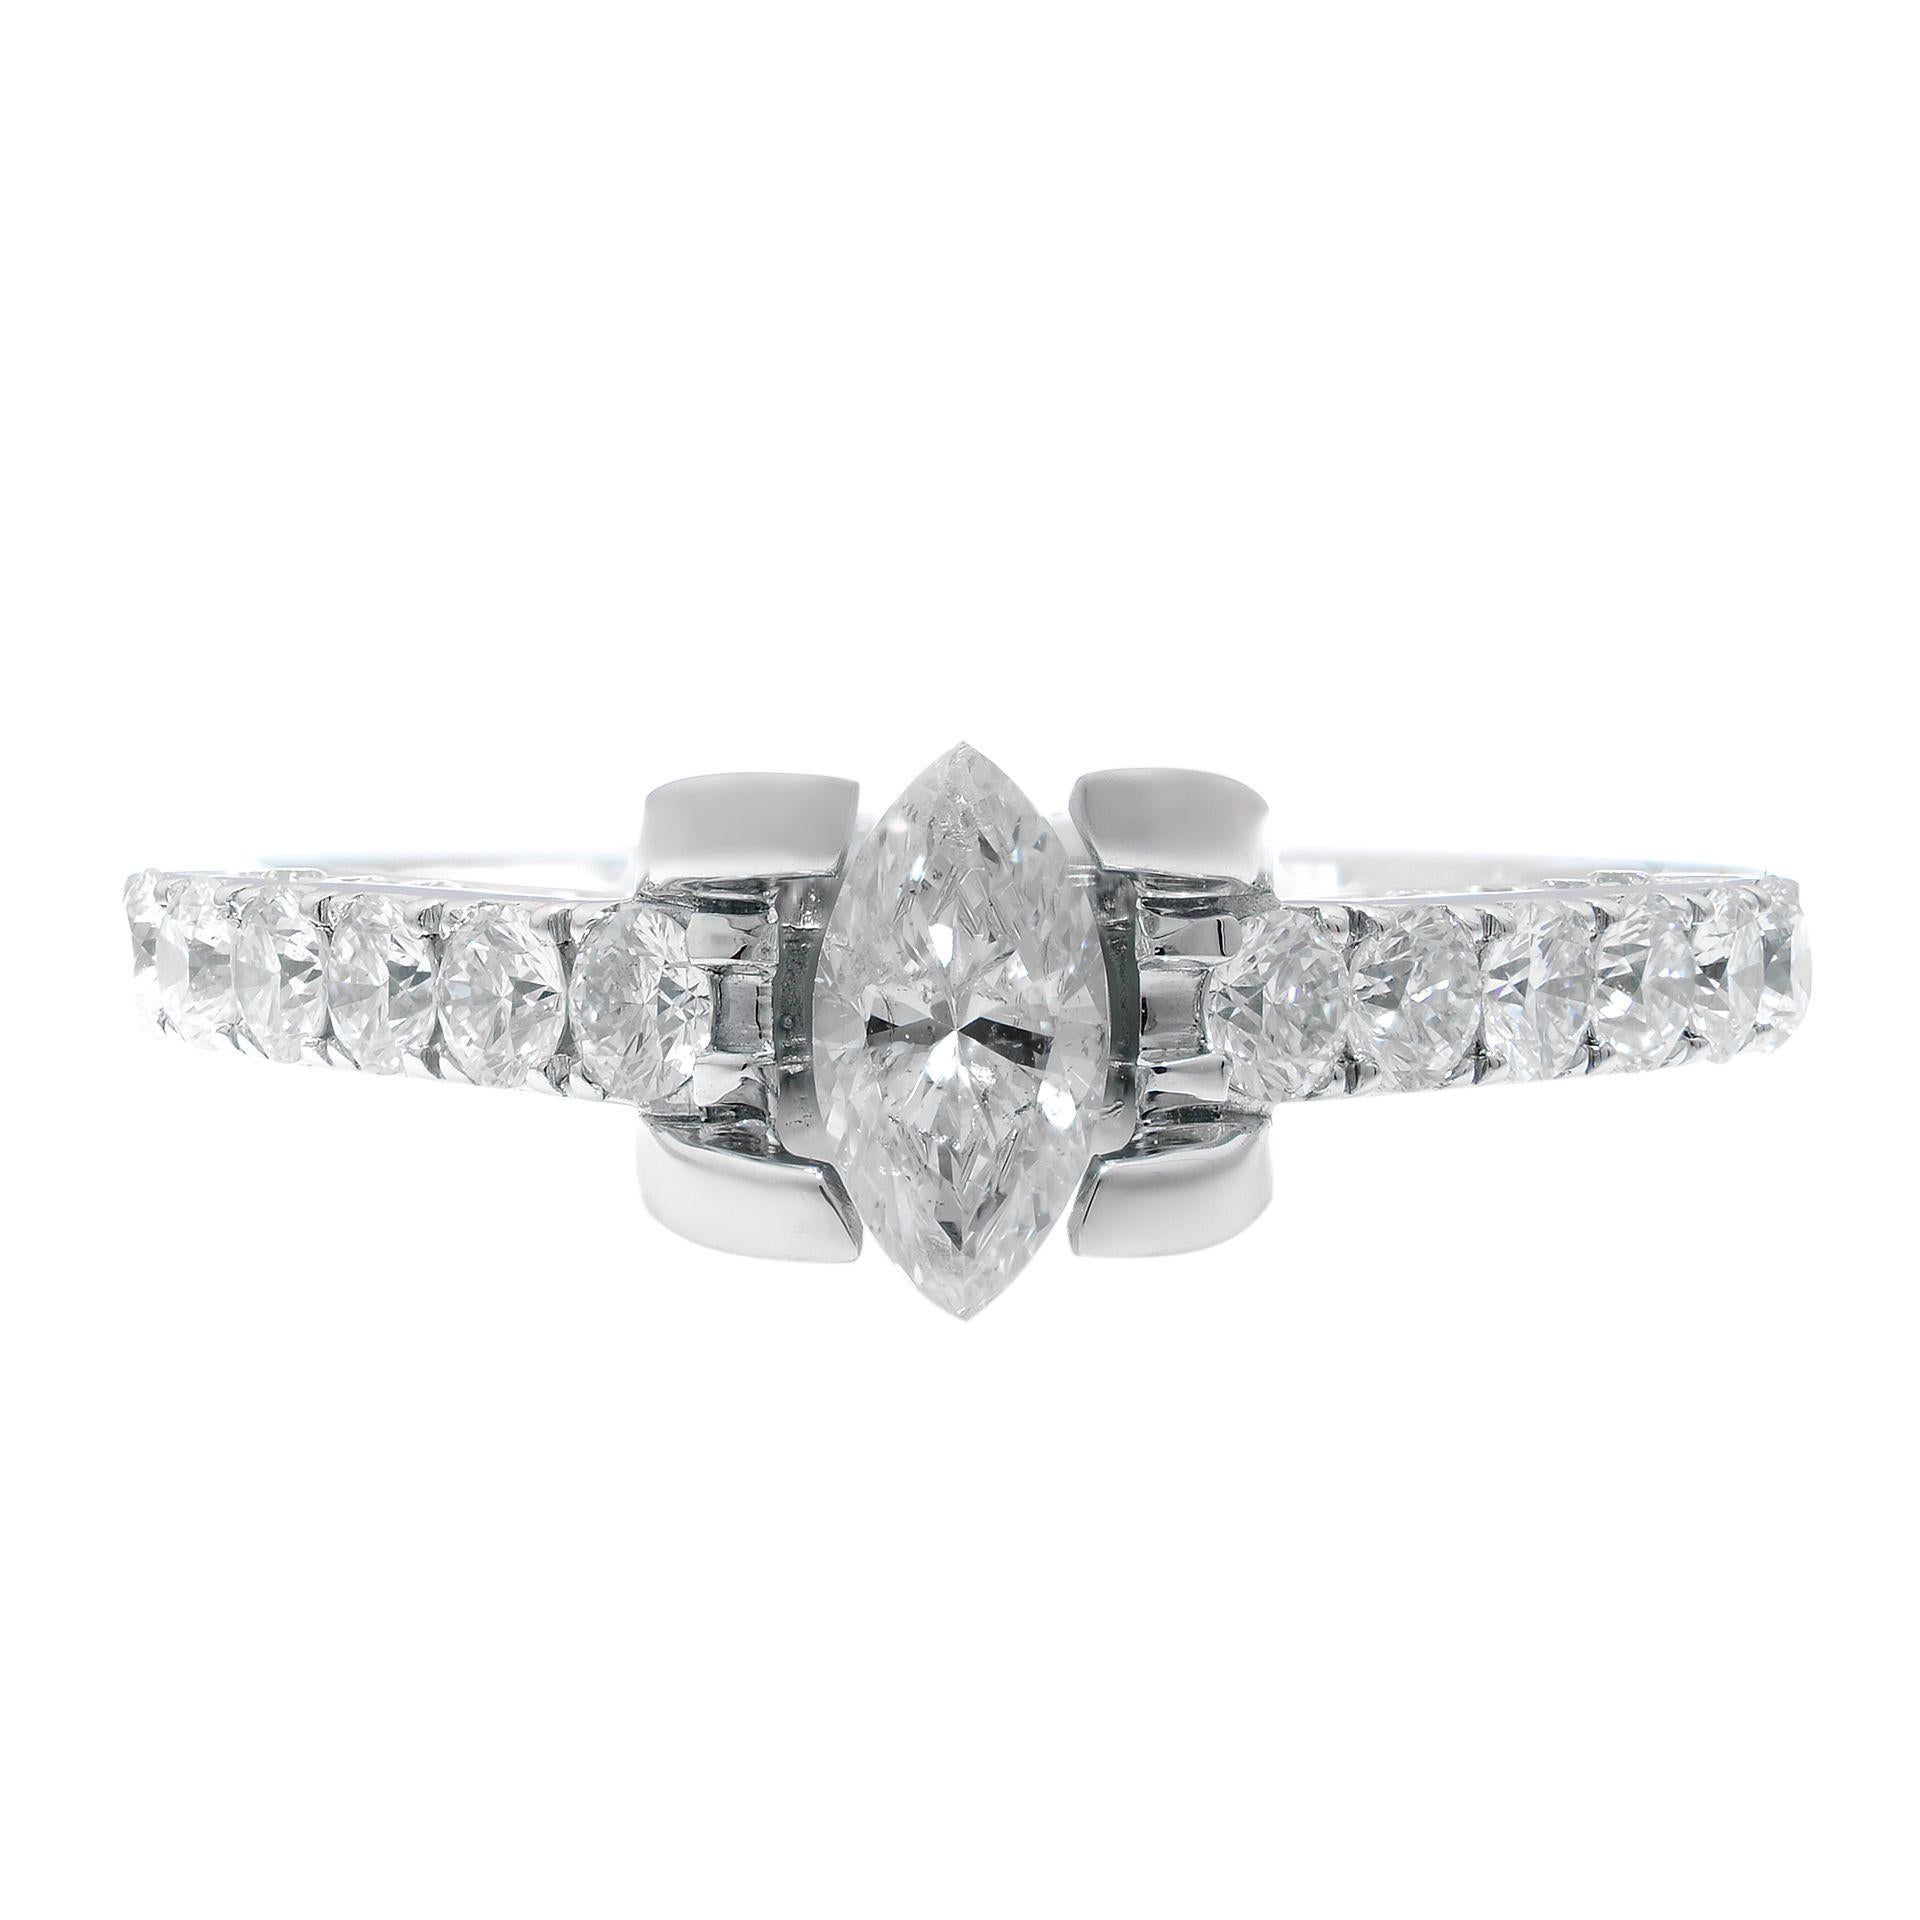 This beautiful diamond engagement ring is crafted in 14K white gold. Featuring a marquise cut center diamond with round brilliant cut diamond accents. Total diamond weight: 1.05cts. Ring size 7. Total weight: 4 gms. Comes with a presentable gift